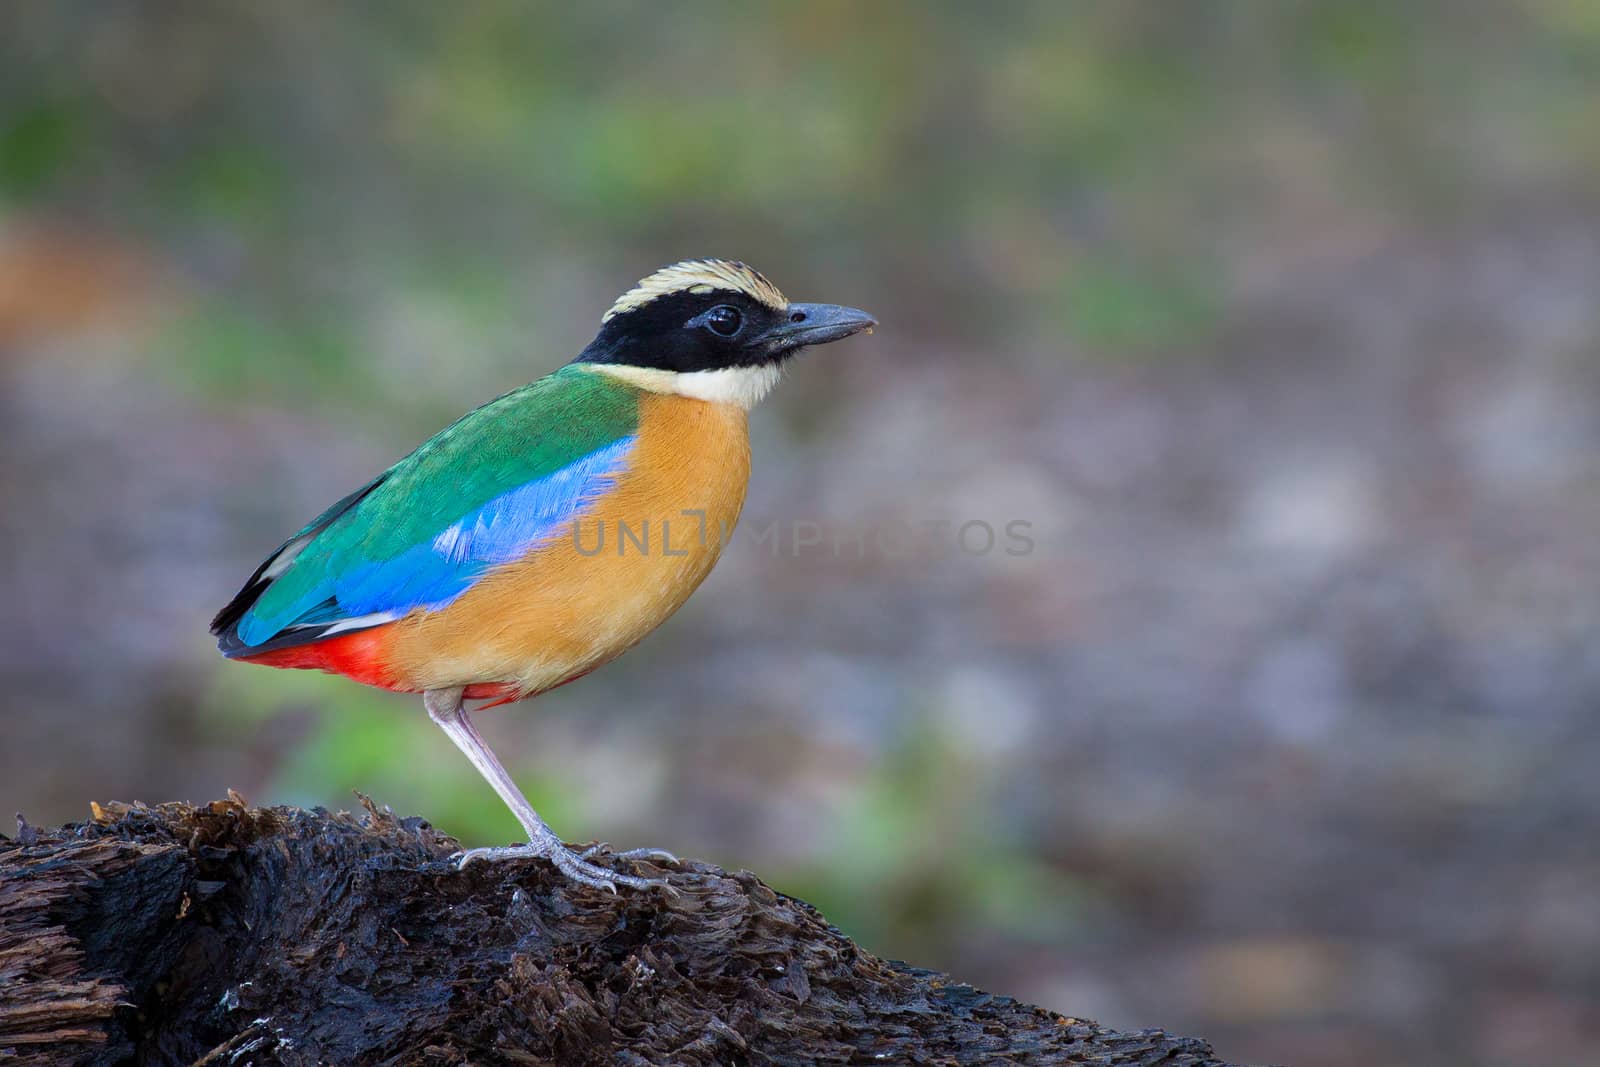 Blue-winged Pitta alone on perch.